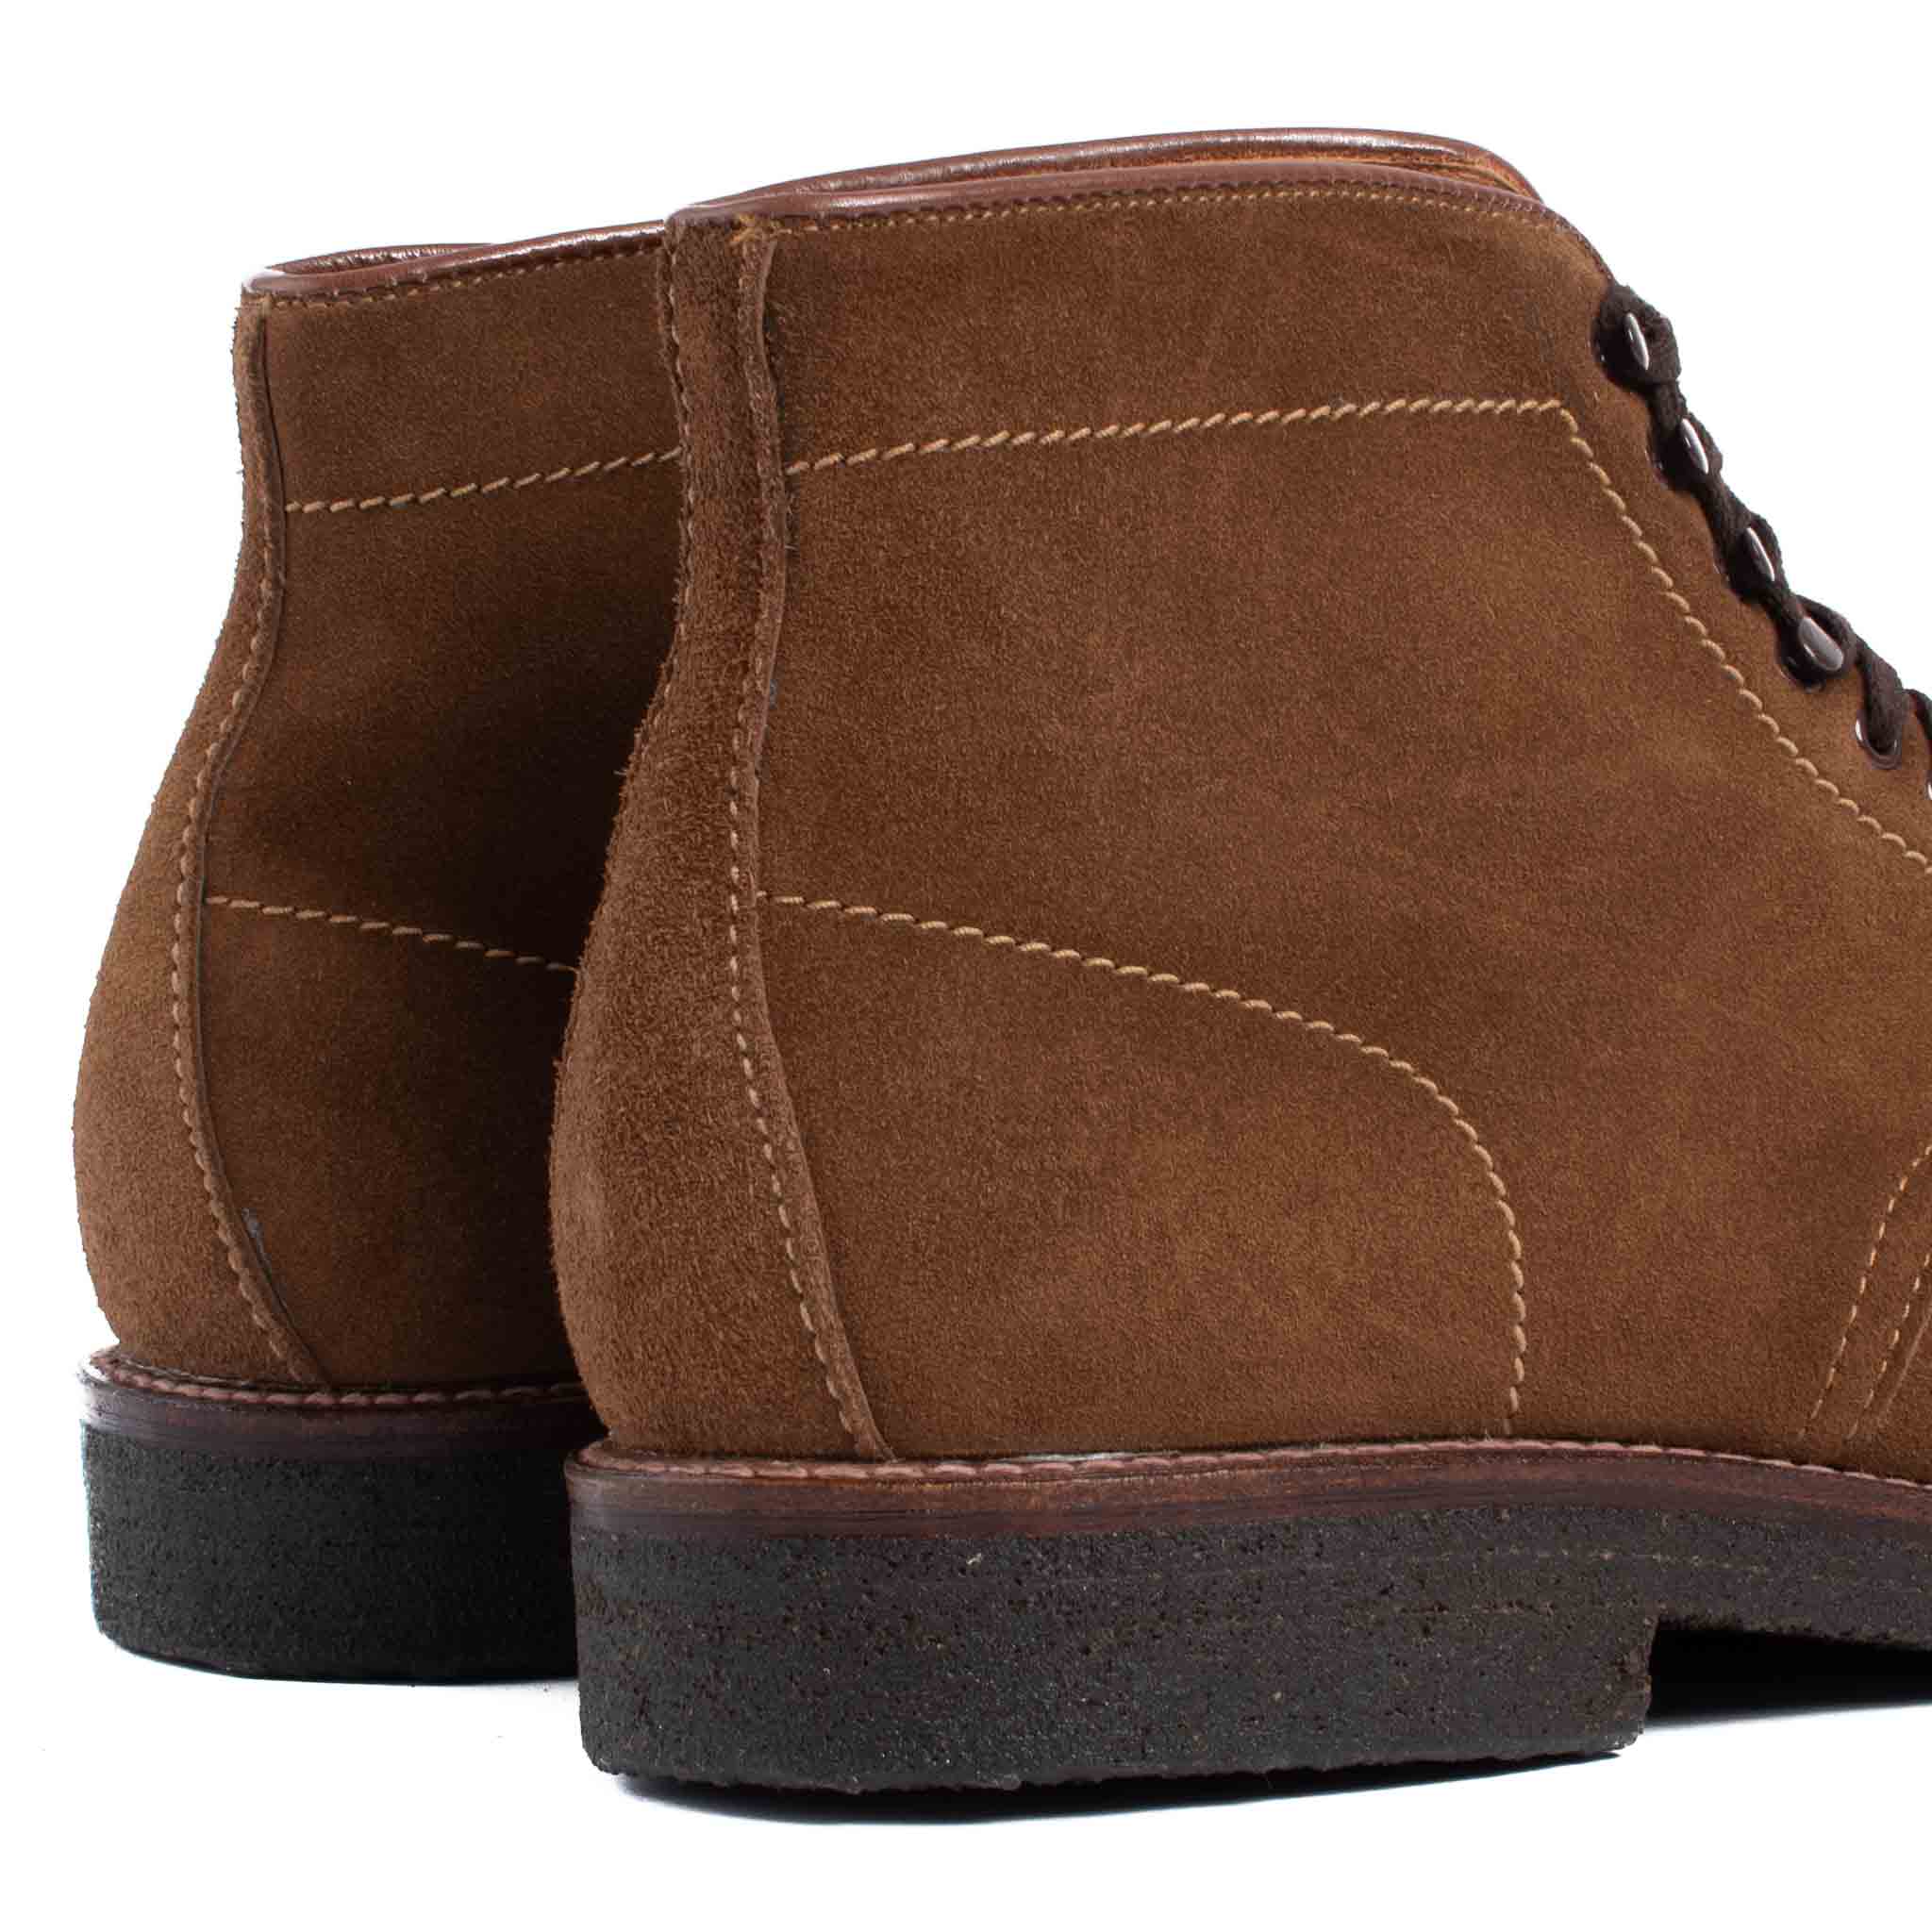 Alden Snuff Suede Indy Boot with Crepe Sole Close